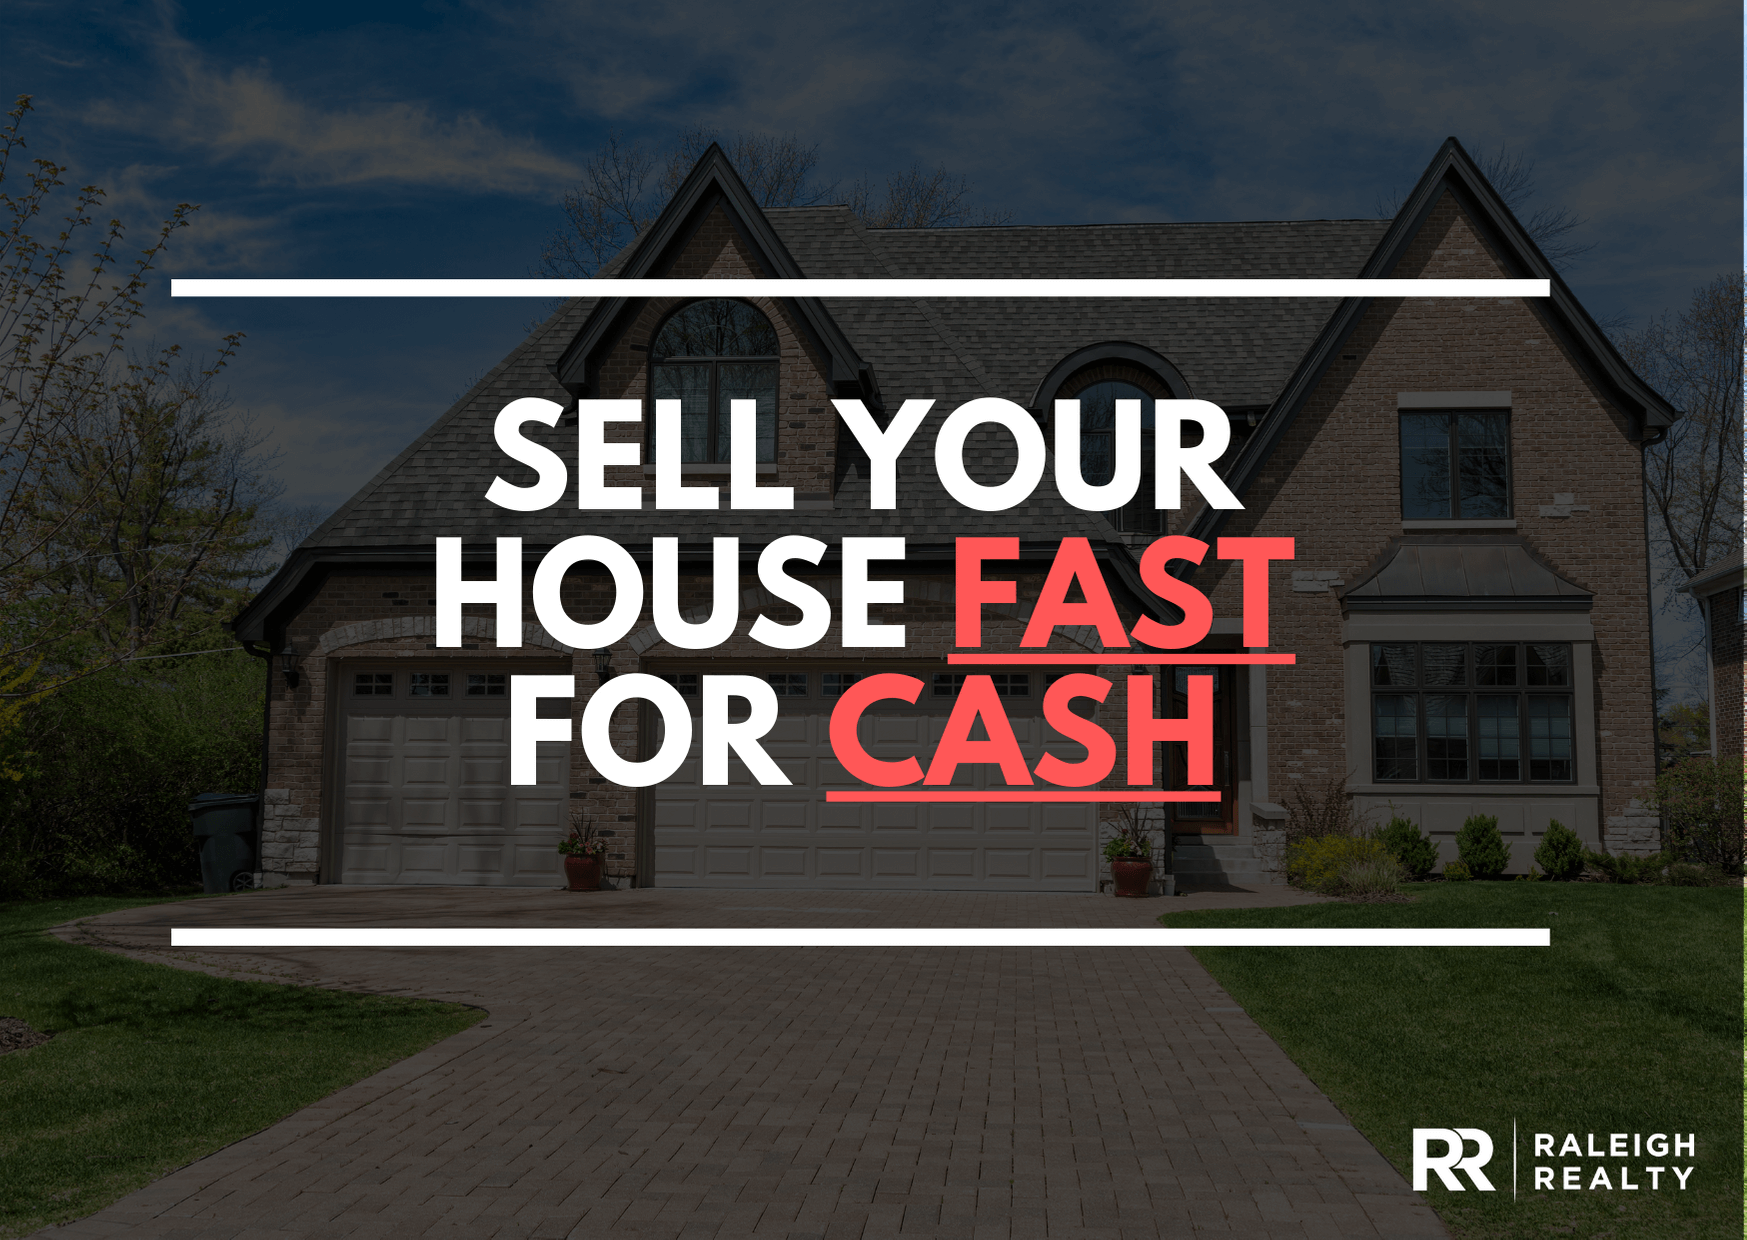 Sell Your House Fast For Cash - Fast sale for cash Real Estate